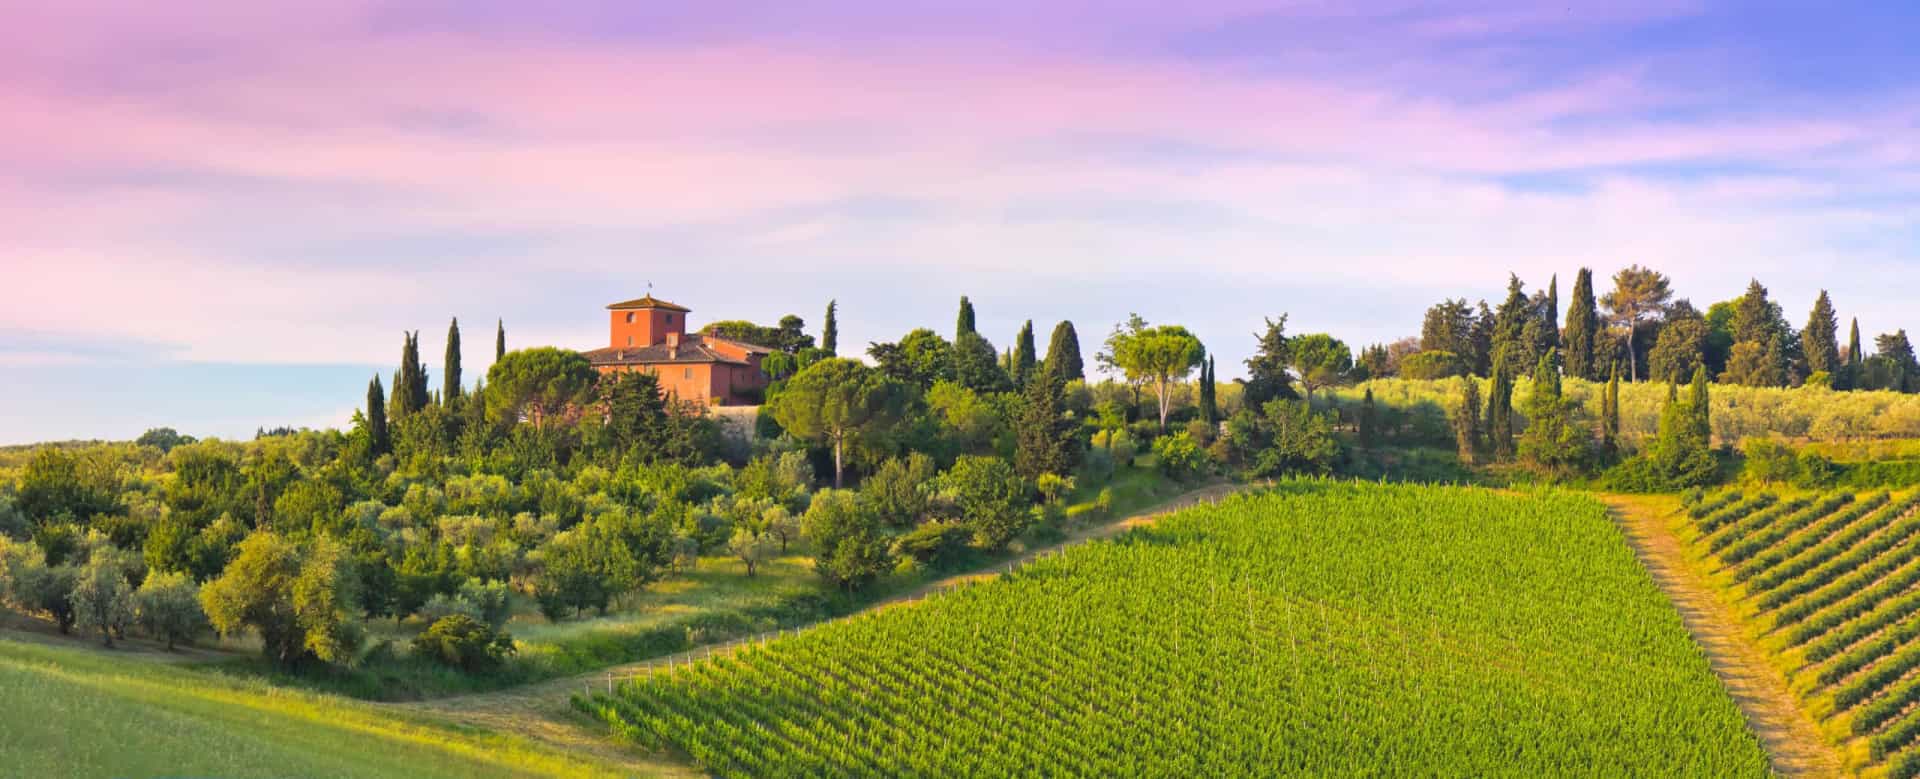 <p>A beach vacation won't cut it for a Virgo, and will only drive them mad. A food and wine tasting trip in Tuscany is a much better alternative. Virgos will love learning about the local gastronomy, and it will keep them busy in a good way.</p>